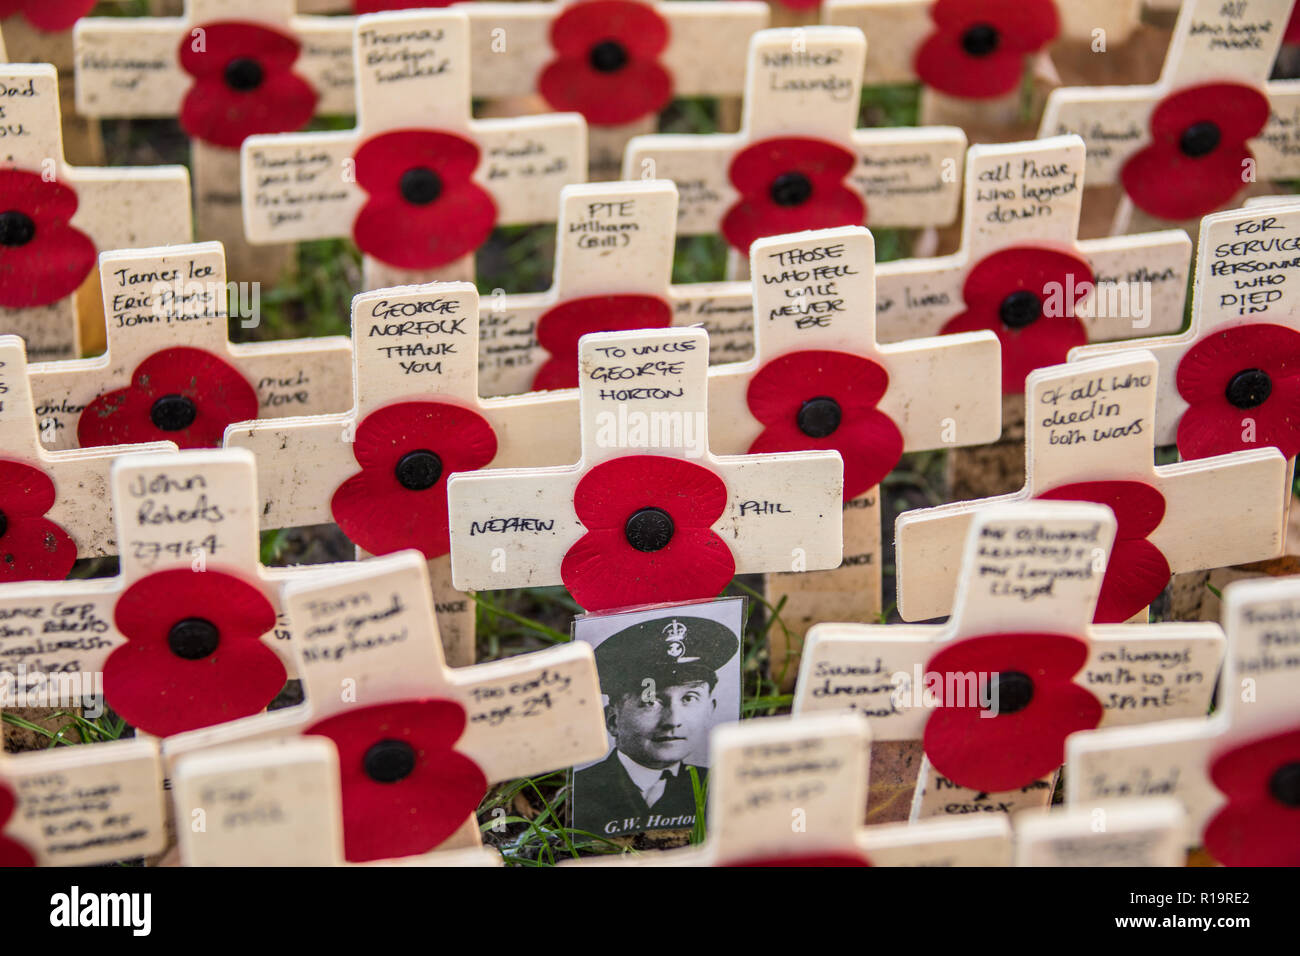 London, UK. 10th Nov, 2018. A black & white picture amongst the lines of poppy crosses at the Westminster Abbey Field of Remembrance. Chief Petty Officer George Horton (pictured) was one of the 1,415 men lost when HMS Hood was sunk in the Denmark Strait on 24th May 1941 during WW2. Credit: David Rowe/Alamy Live News Stock Photo